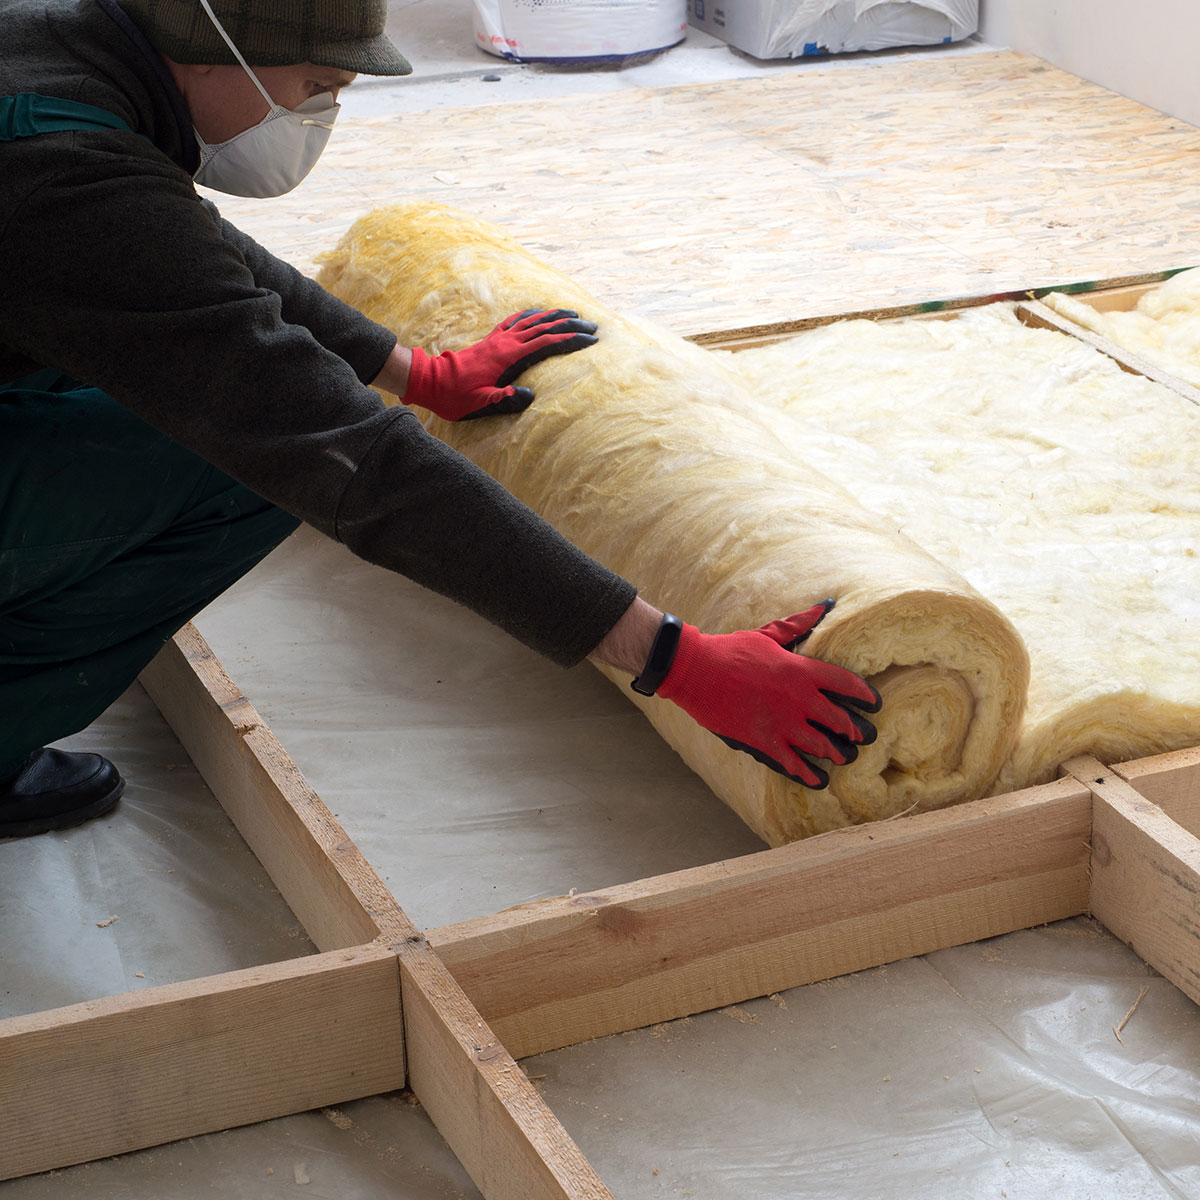 Pros And Cons Of Bubble Wrap Insulation